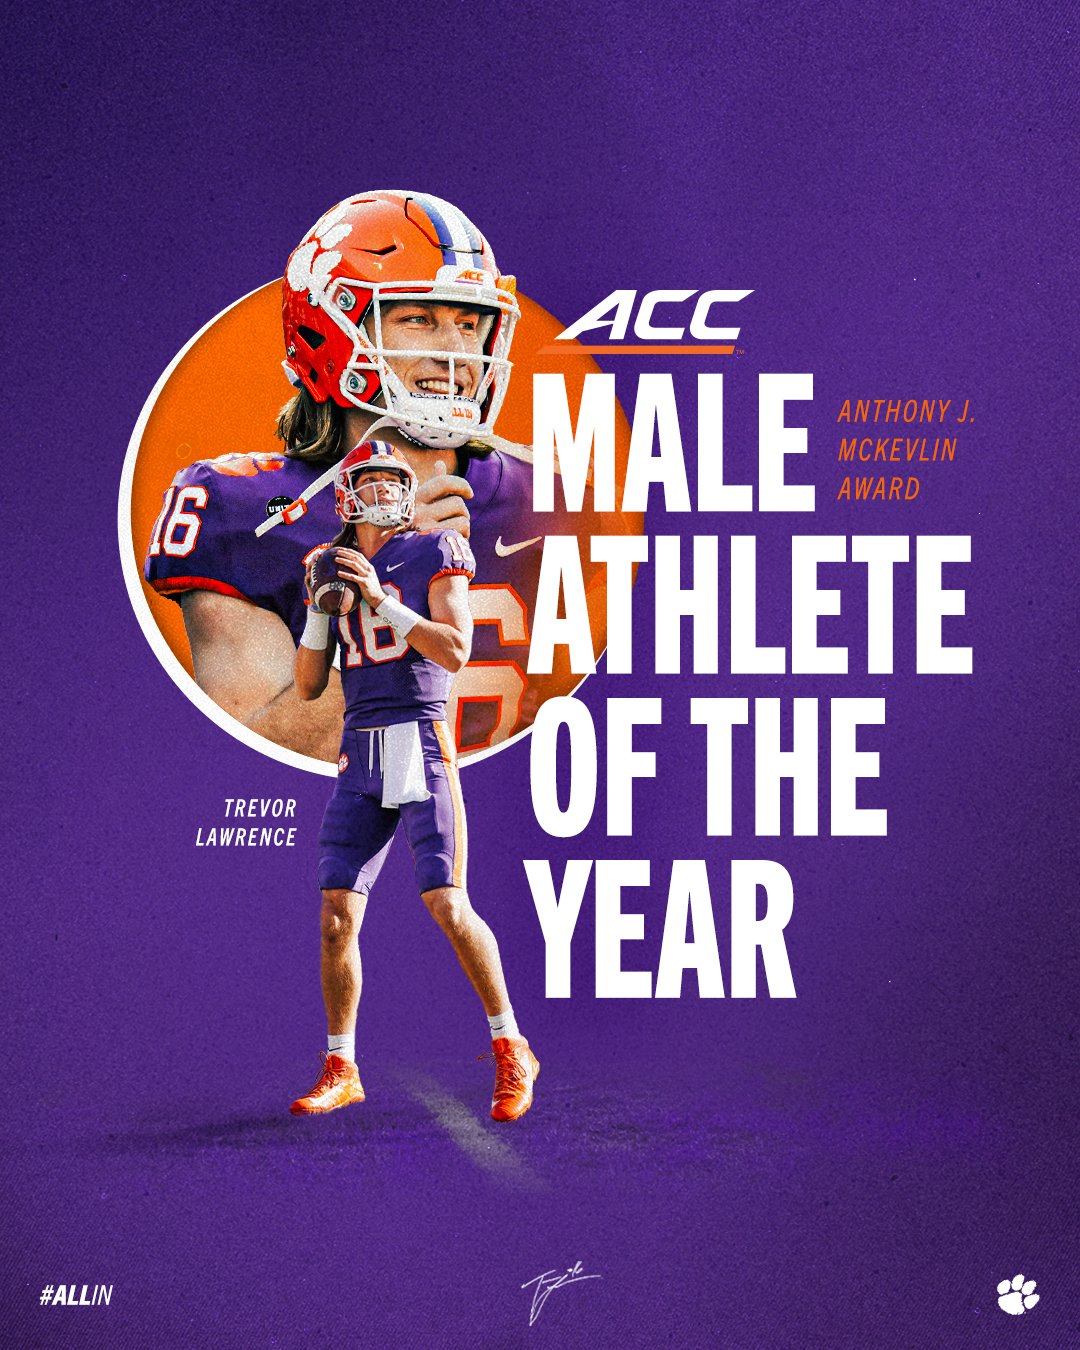 Lawrence Earns McKevlin Award as ACC Male Athlete of the Year